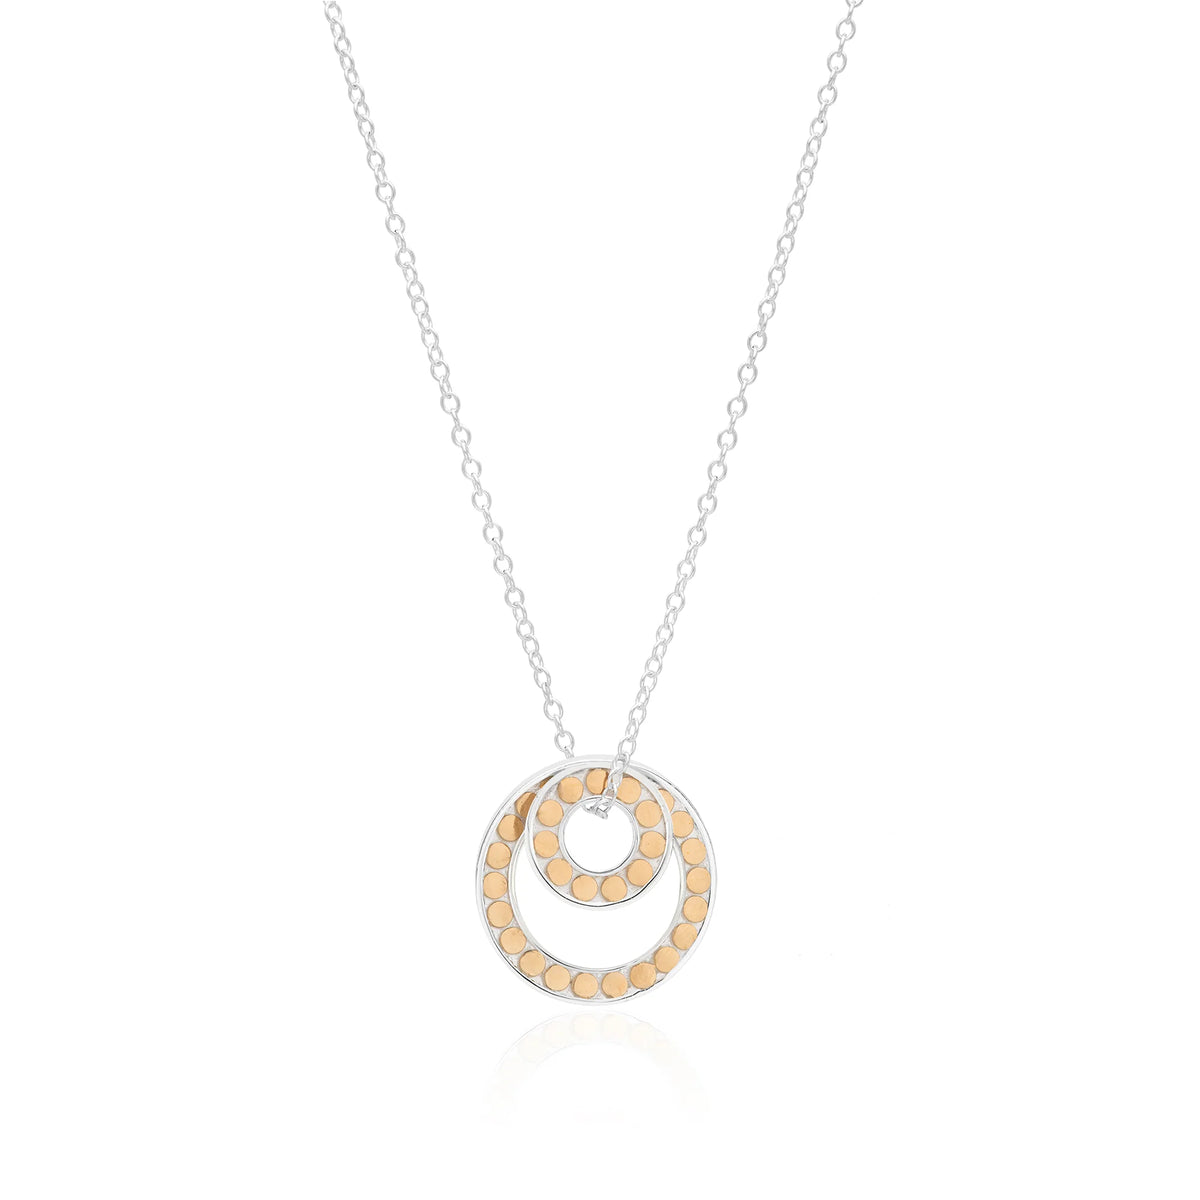 Double circle sterling silver and gold plated necklace on a silver chain